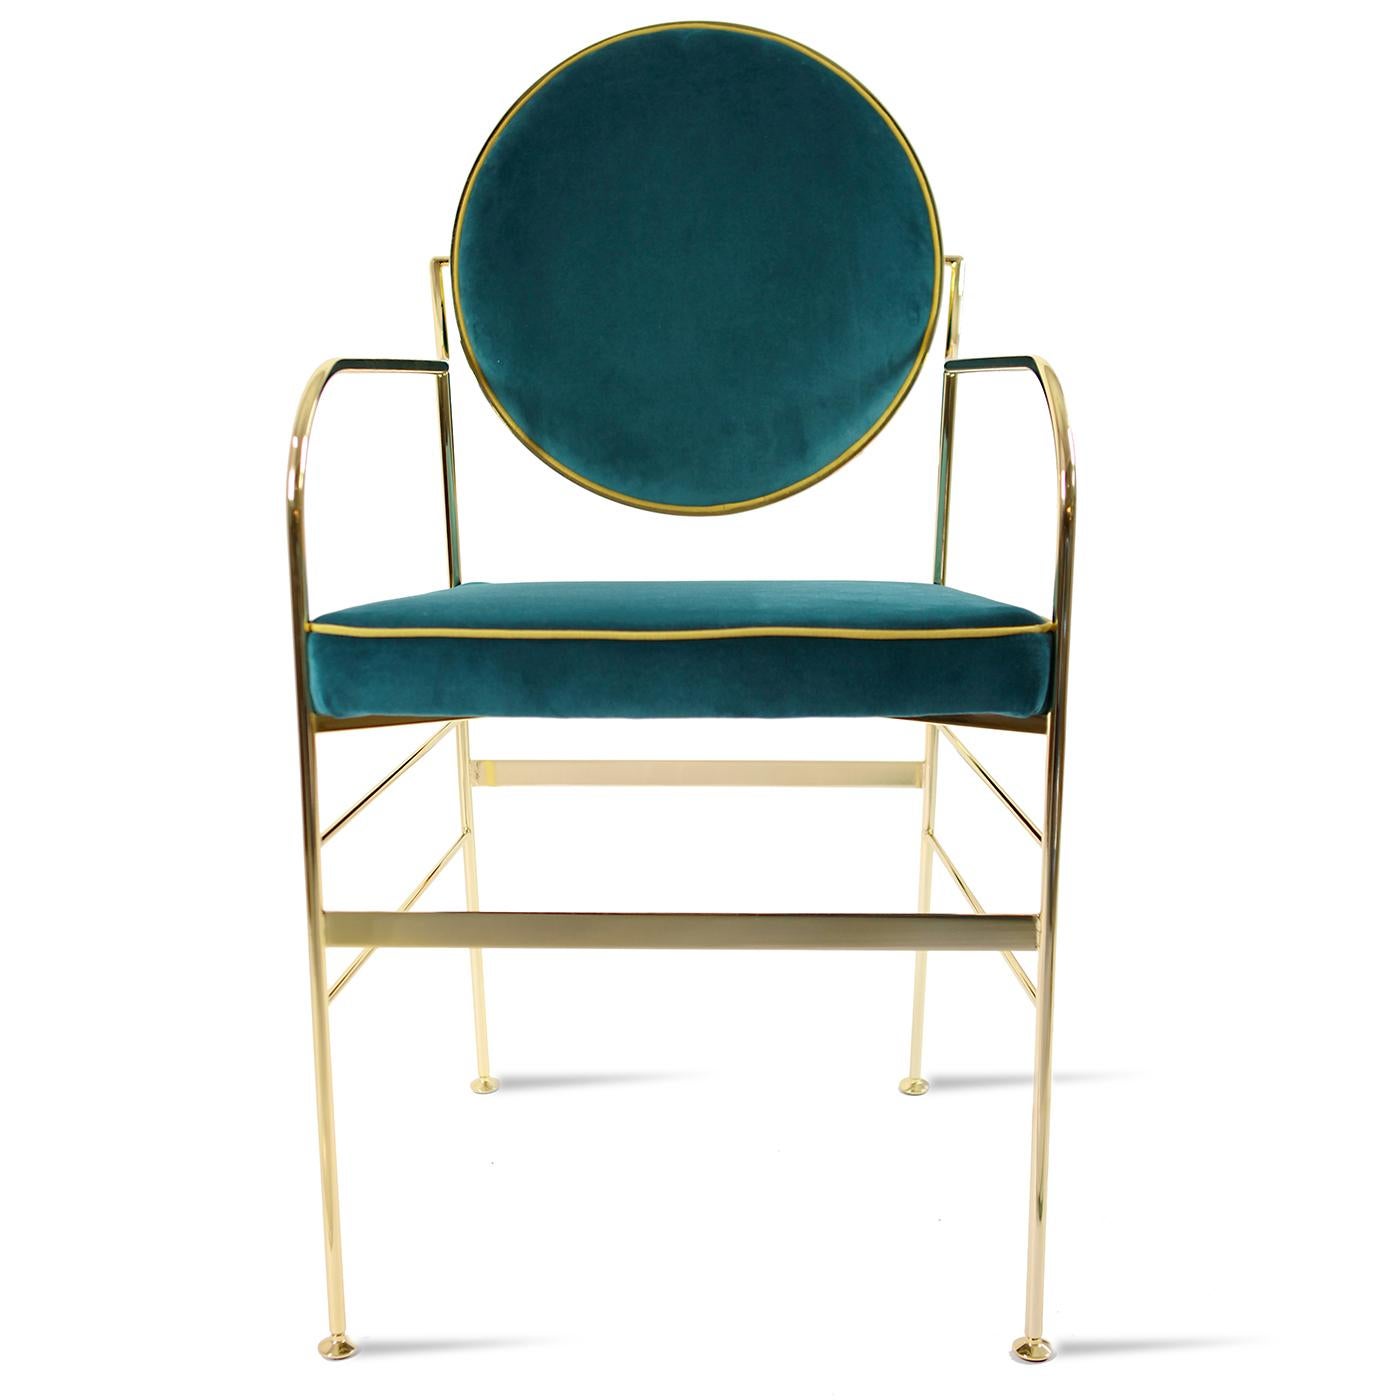 Italian Luigina Gold and Peacock Blue Chair by Sotow